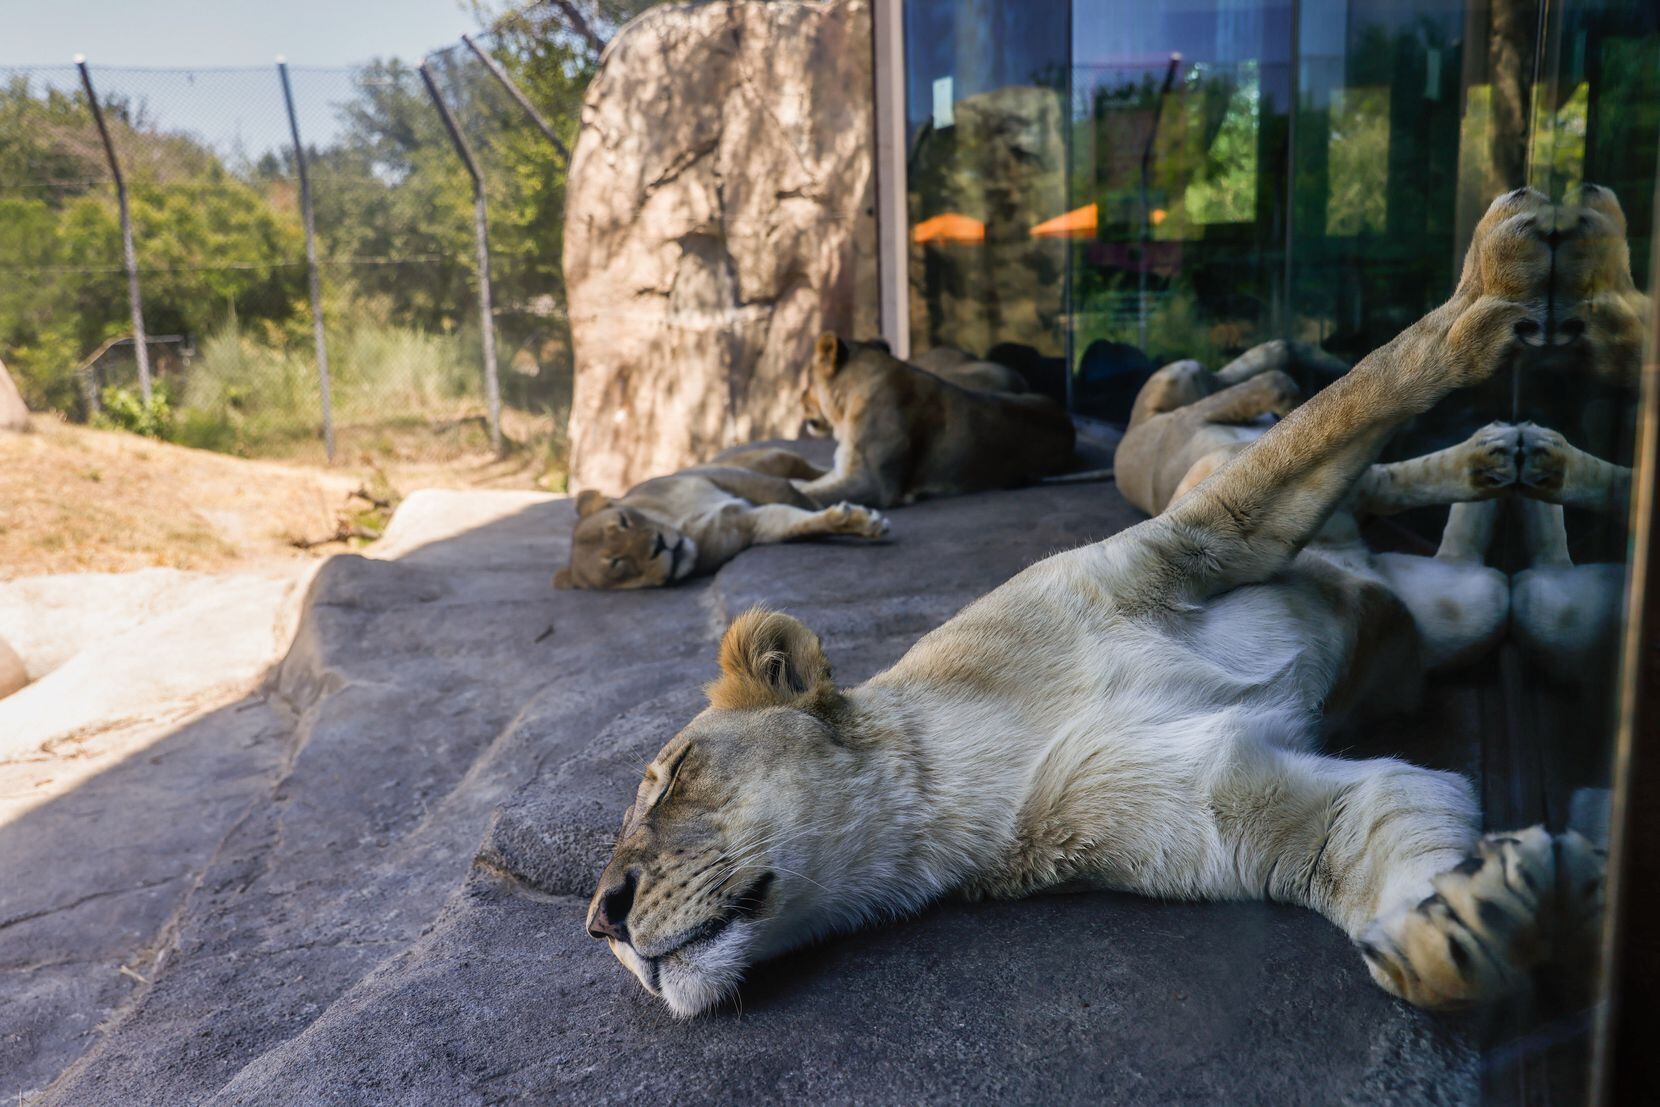 Lionesses at the Dallas Zoo rested last week under a shade that is kept at cool temperatures...